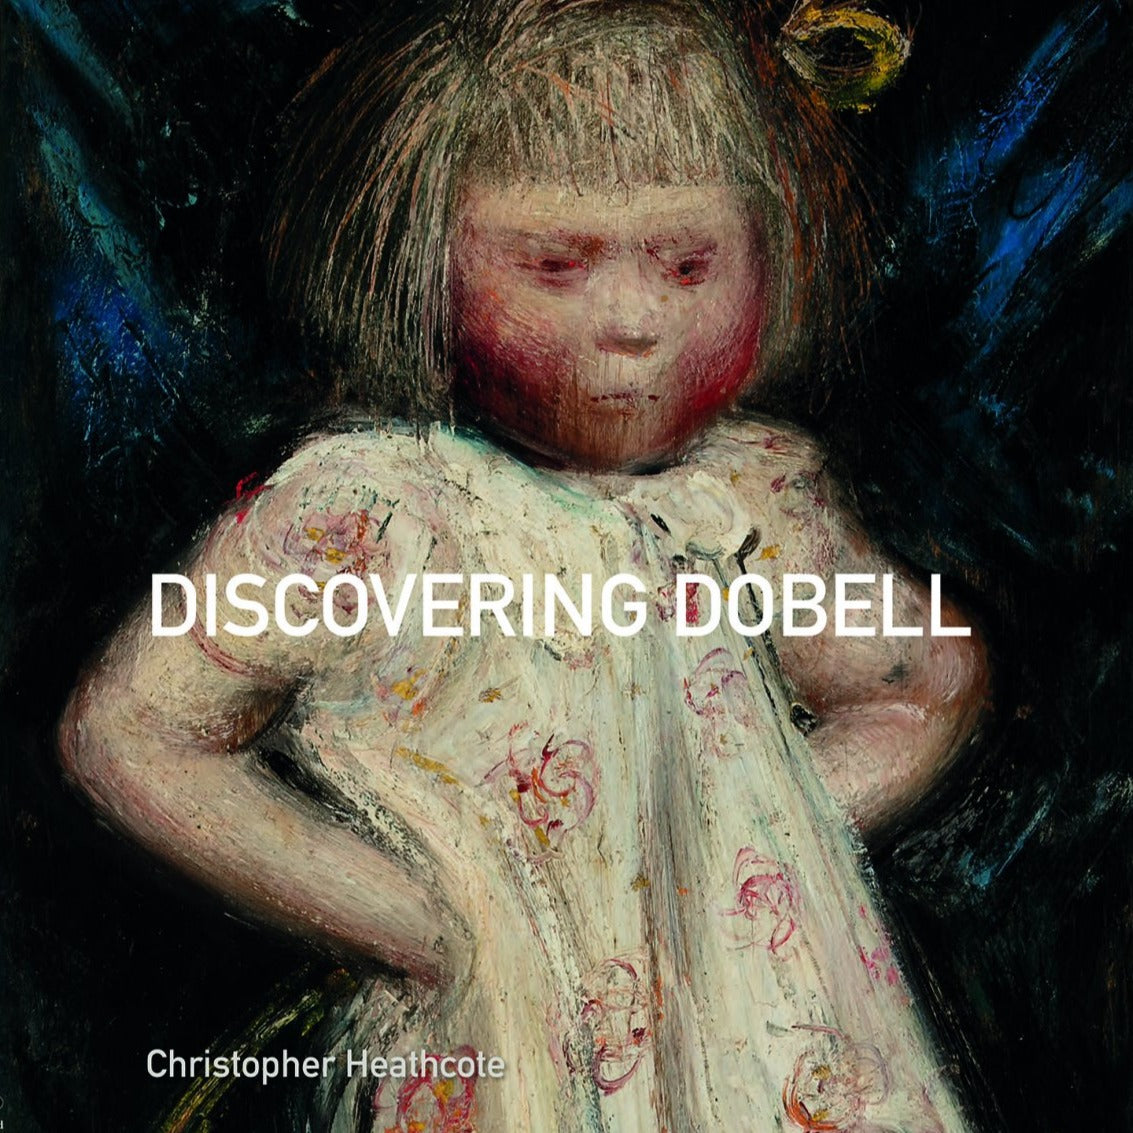 Discovering Dobell by Christopher Heathcote